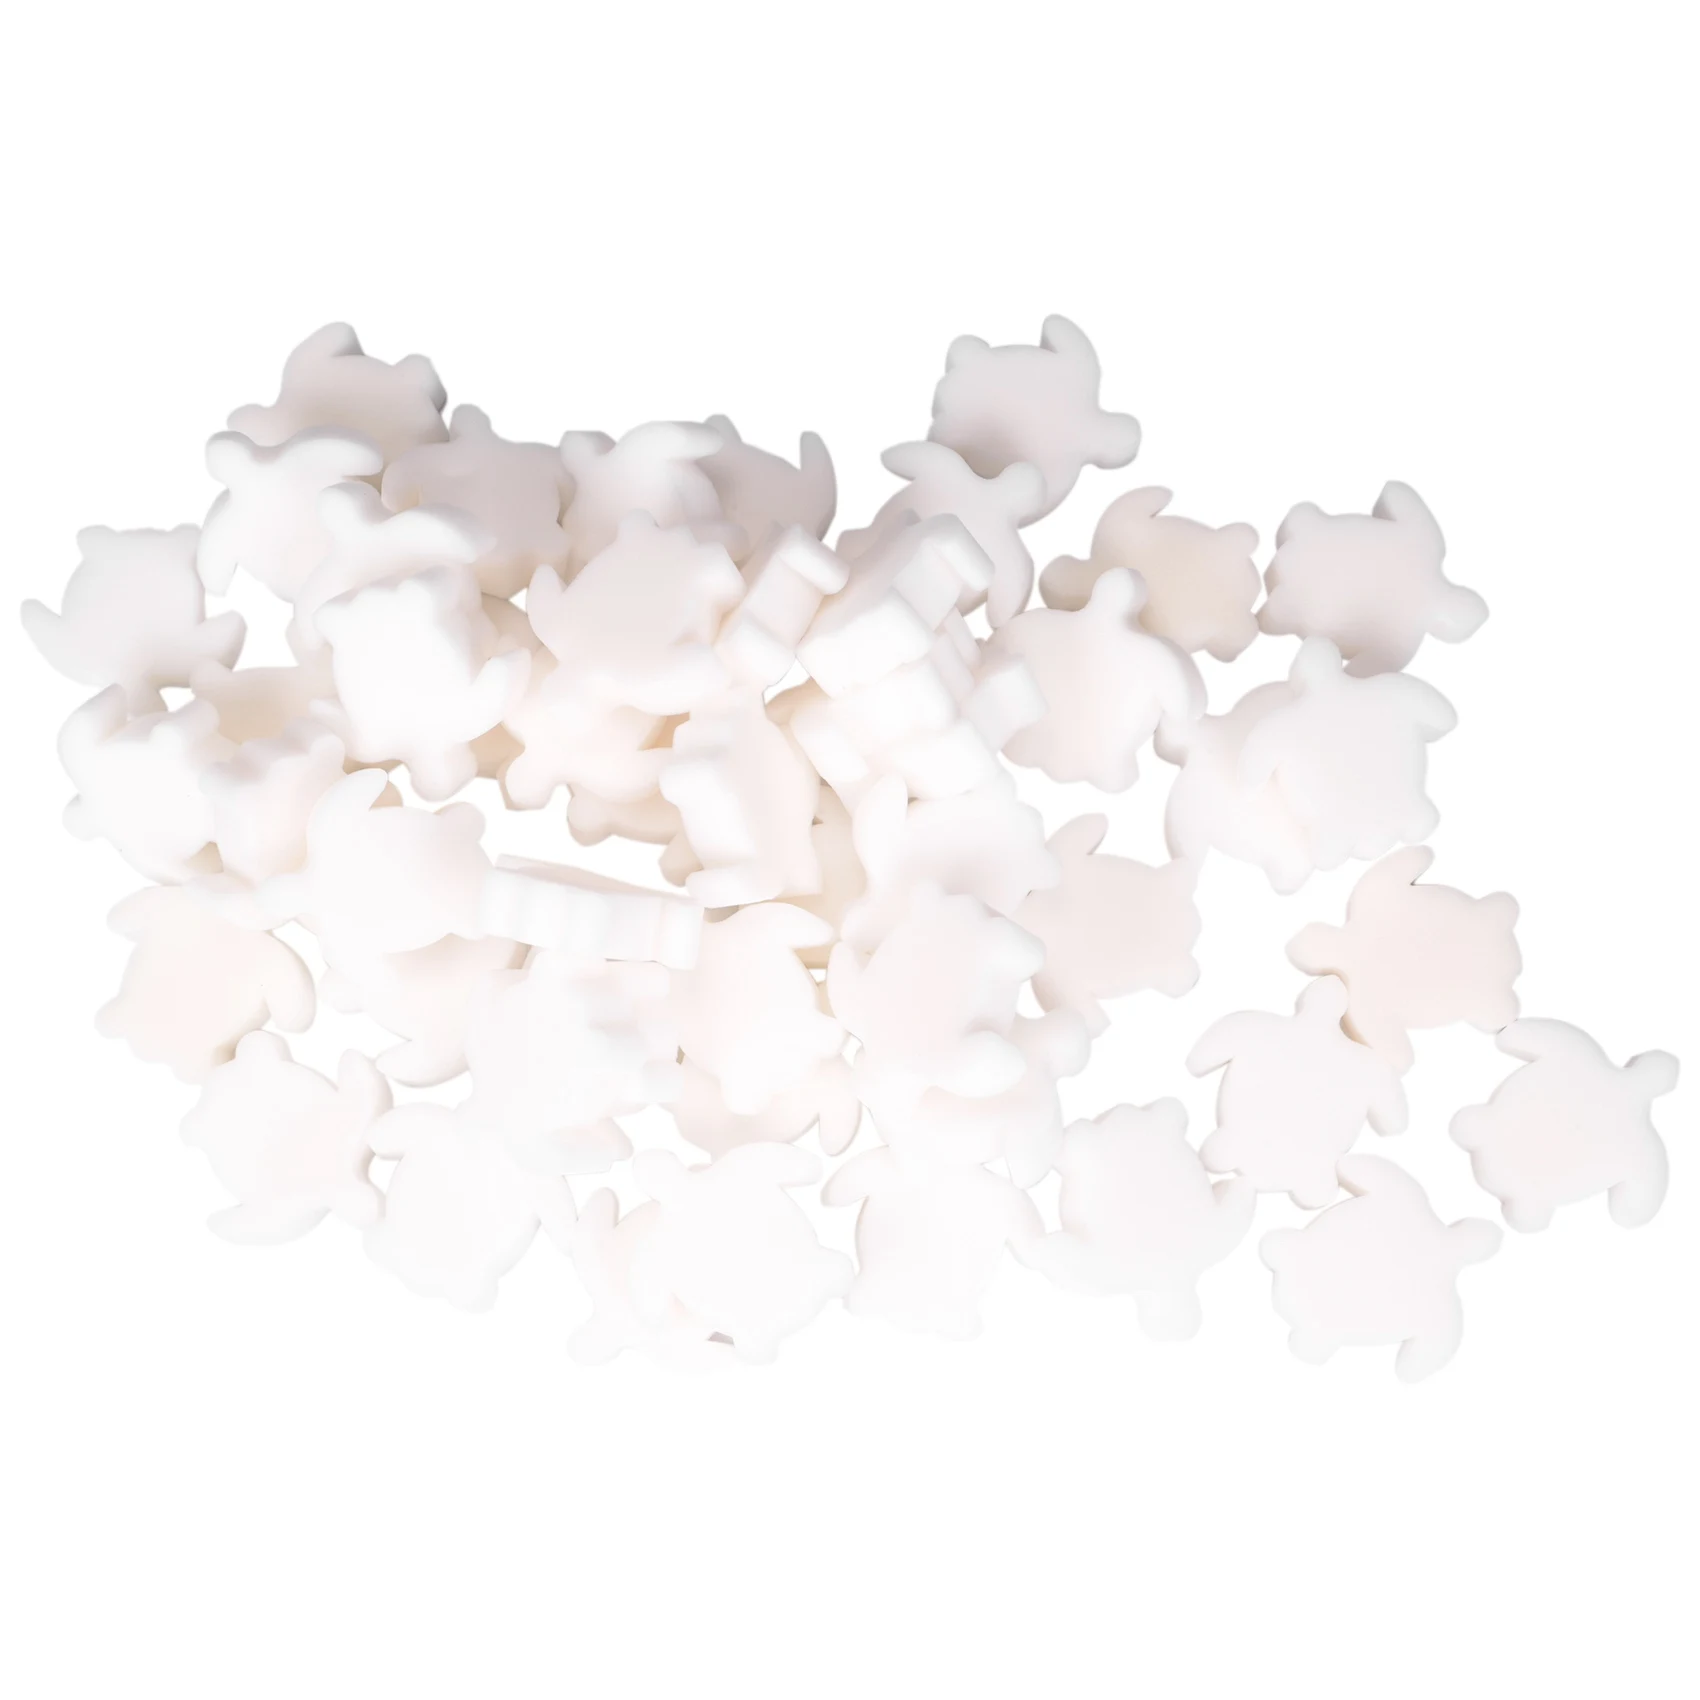 

50Pcs White Floating Spa Sponge Turtle Oil Absorbing Hot Tub Skimmer Scum Absorber Cleaners for Swimming Pool